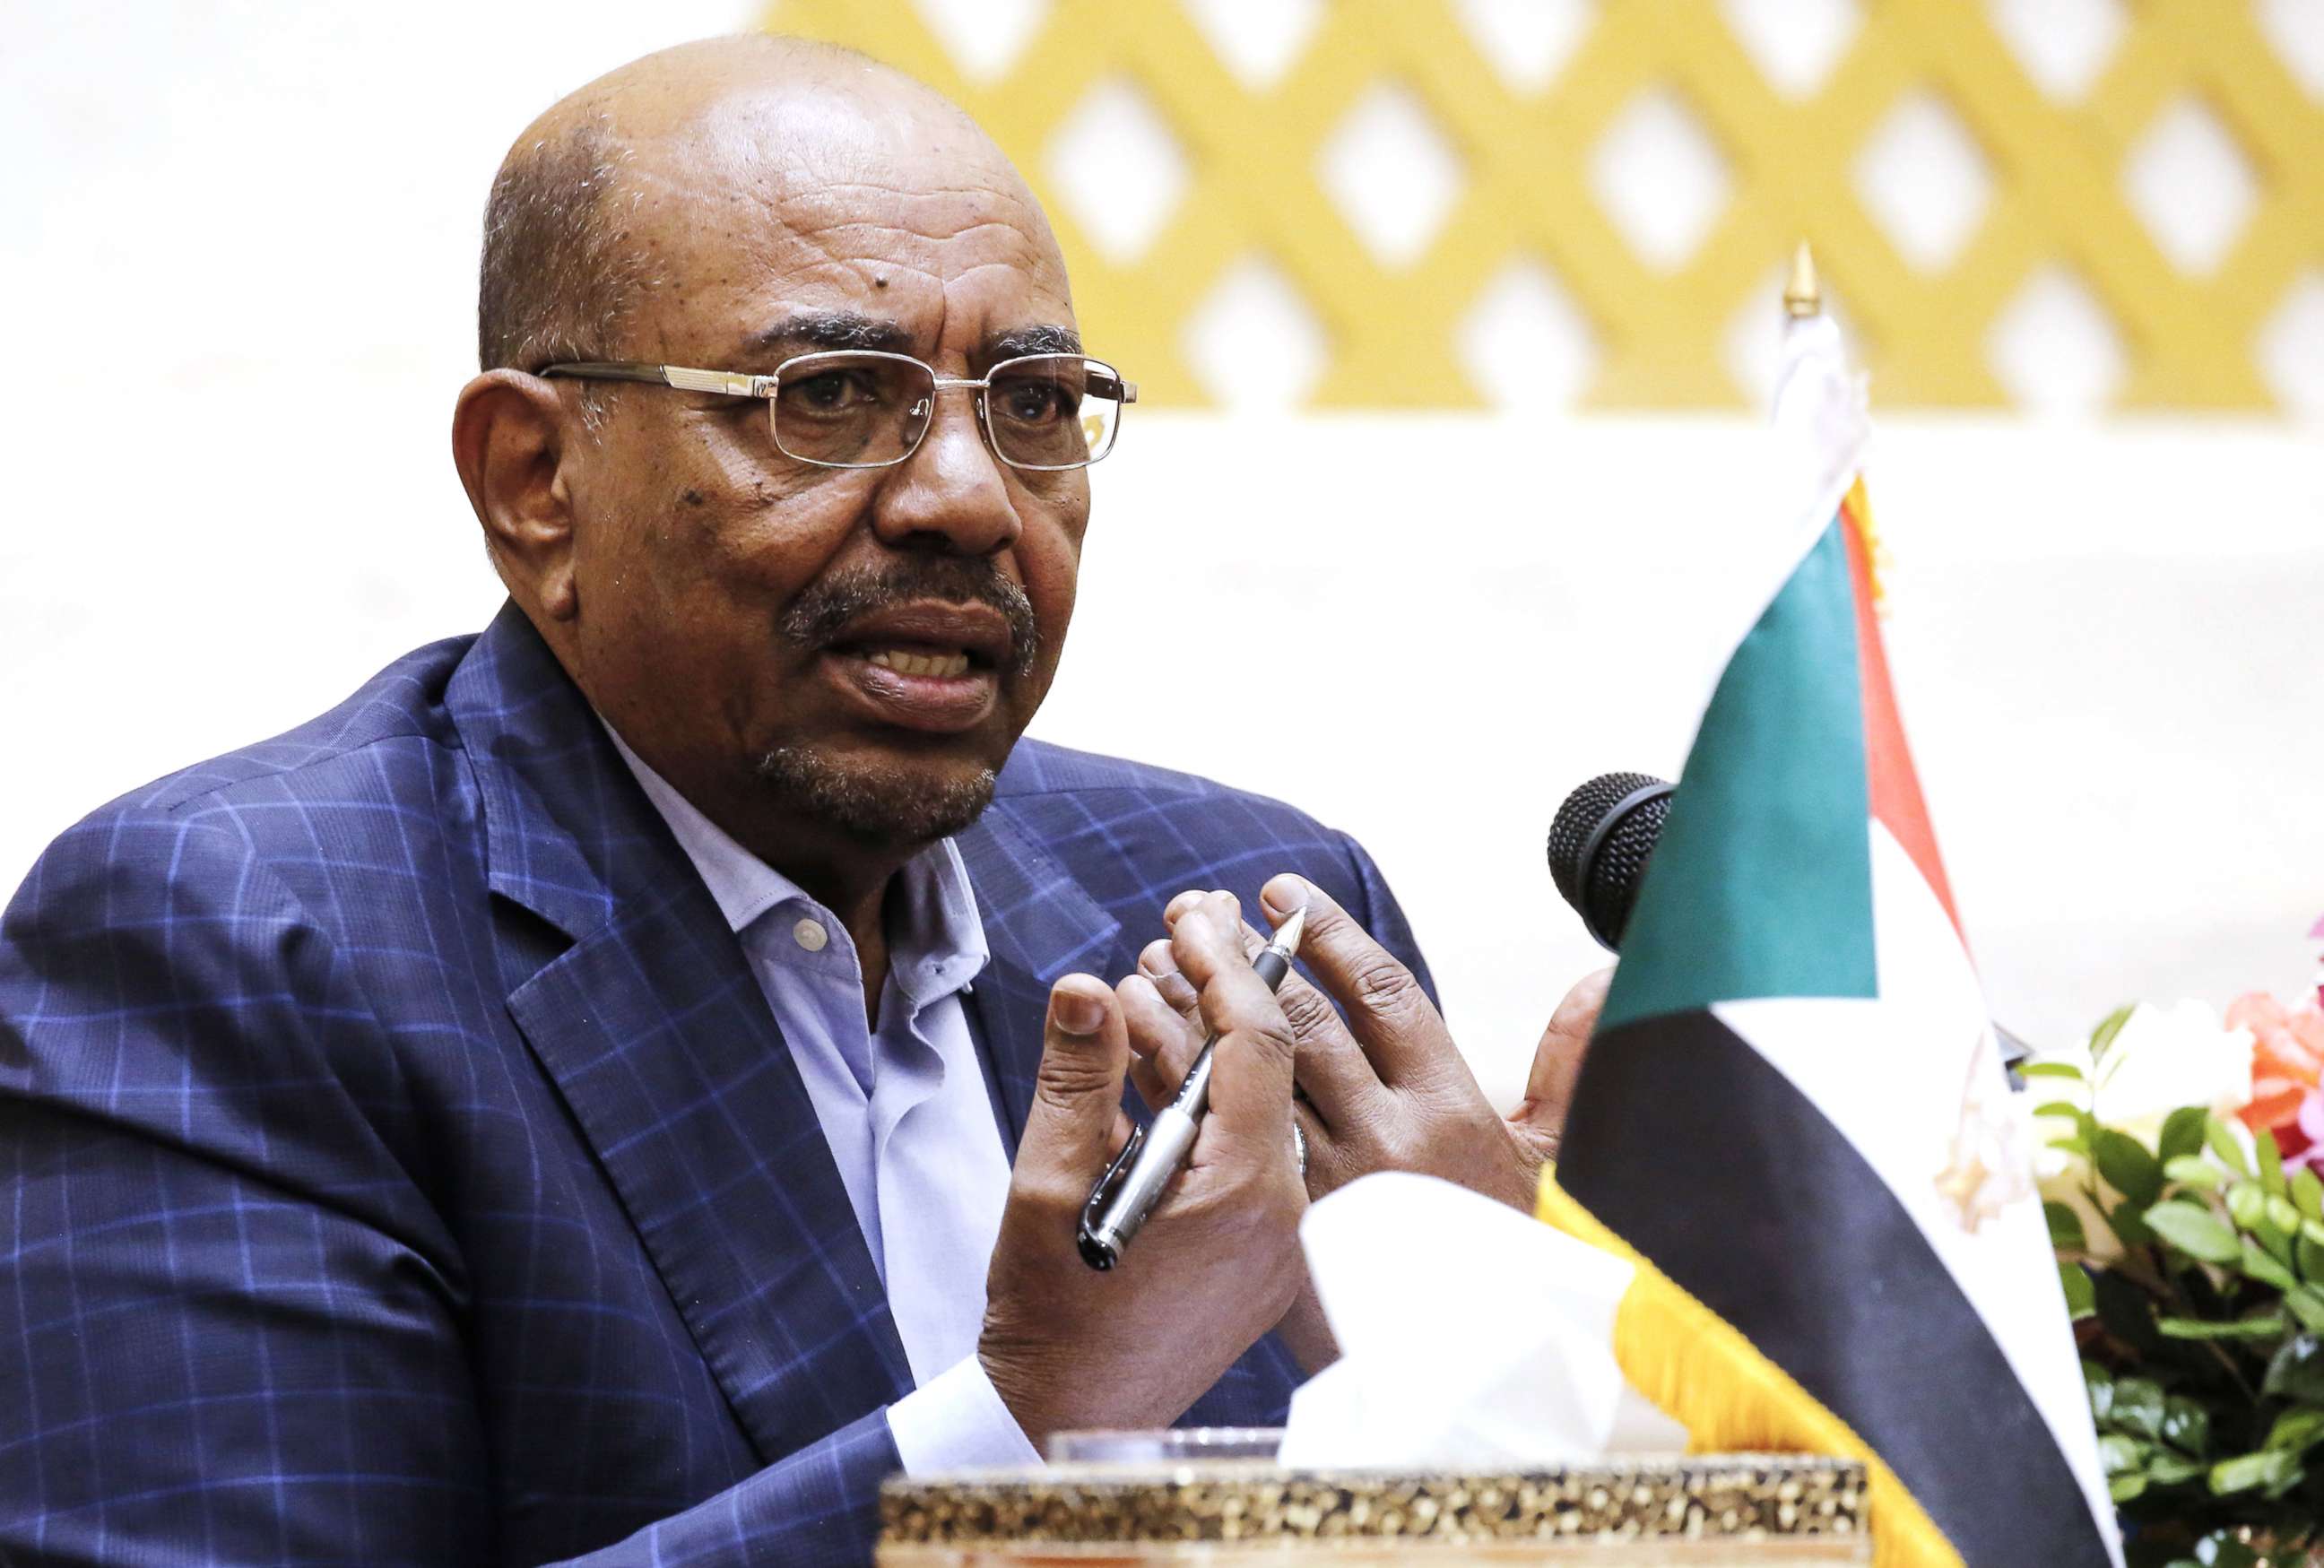 PHOTO: In this file photo taken on March 02, 2017, Sudanese President Omar al-Bashir gives a press conference at the presidential palace in the capital Khartoum.